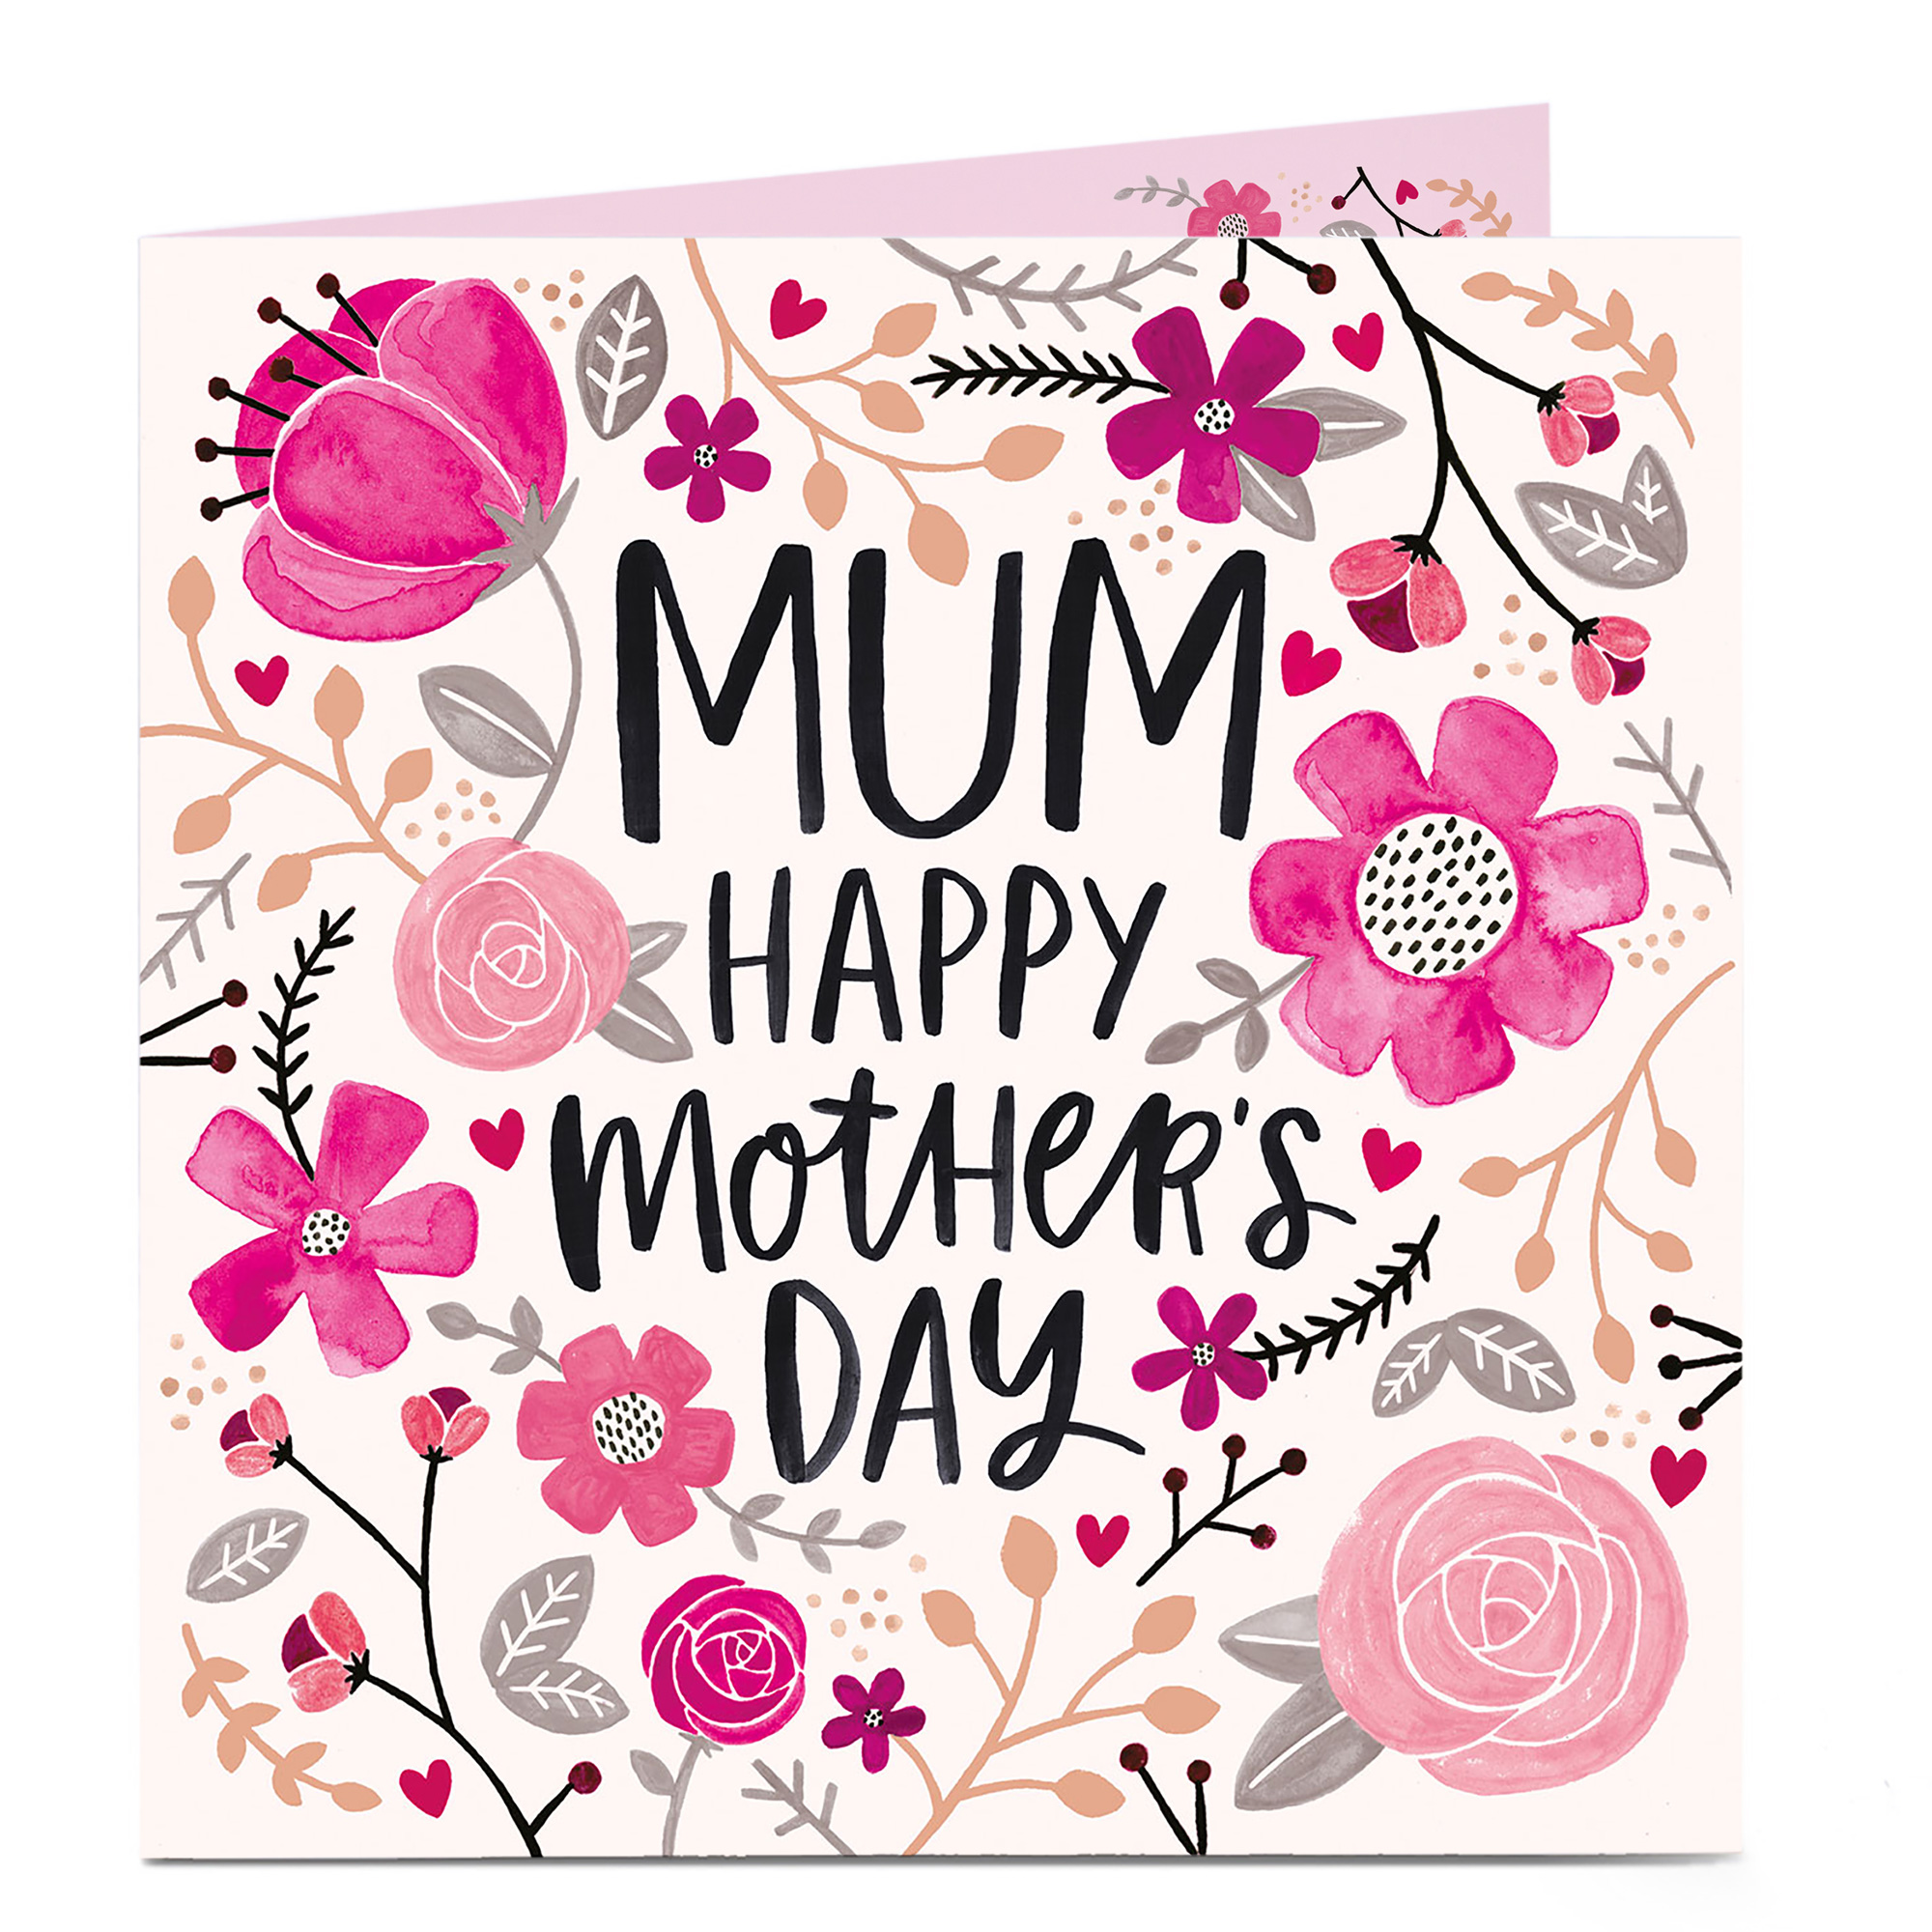 Mother S Day Photo Cards We Make Mother S Day Cards Kalambaka Library Make Her Day With